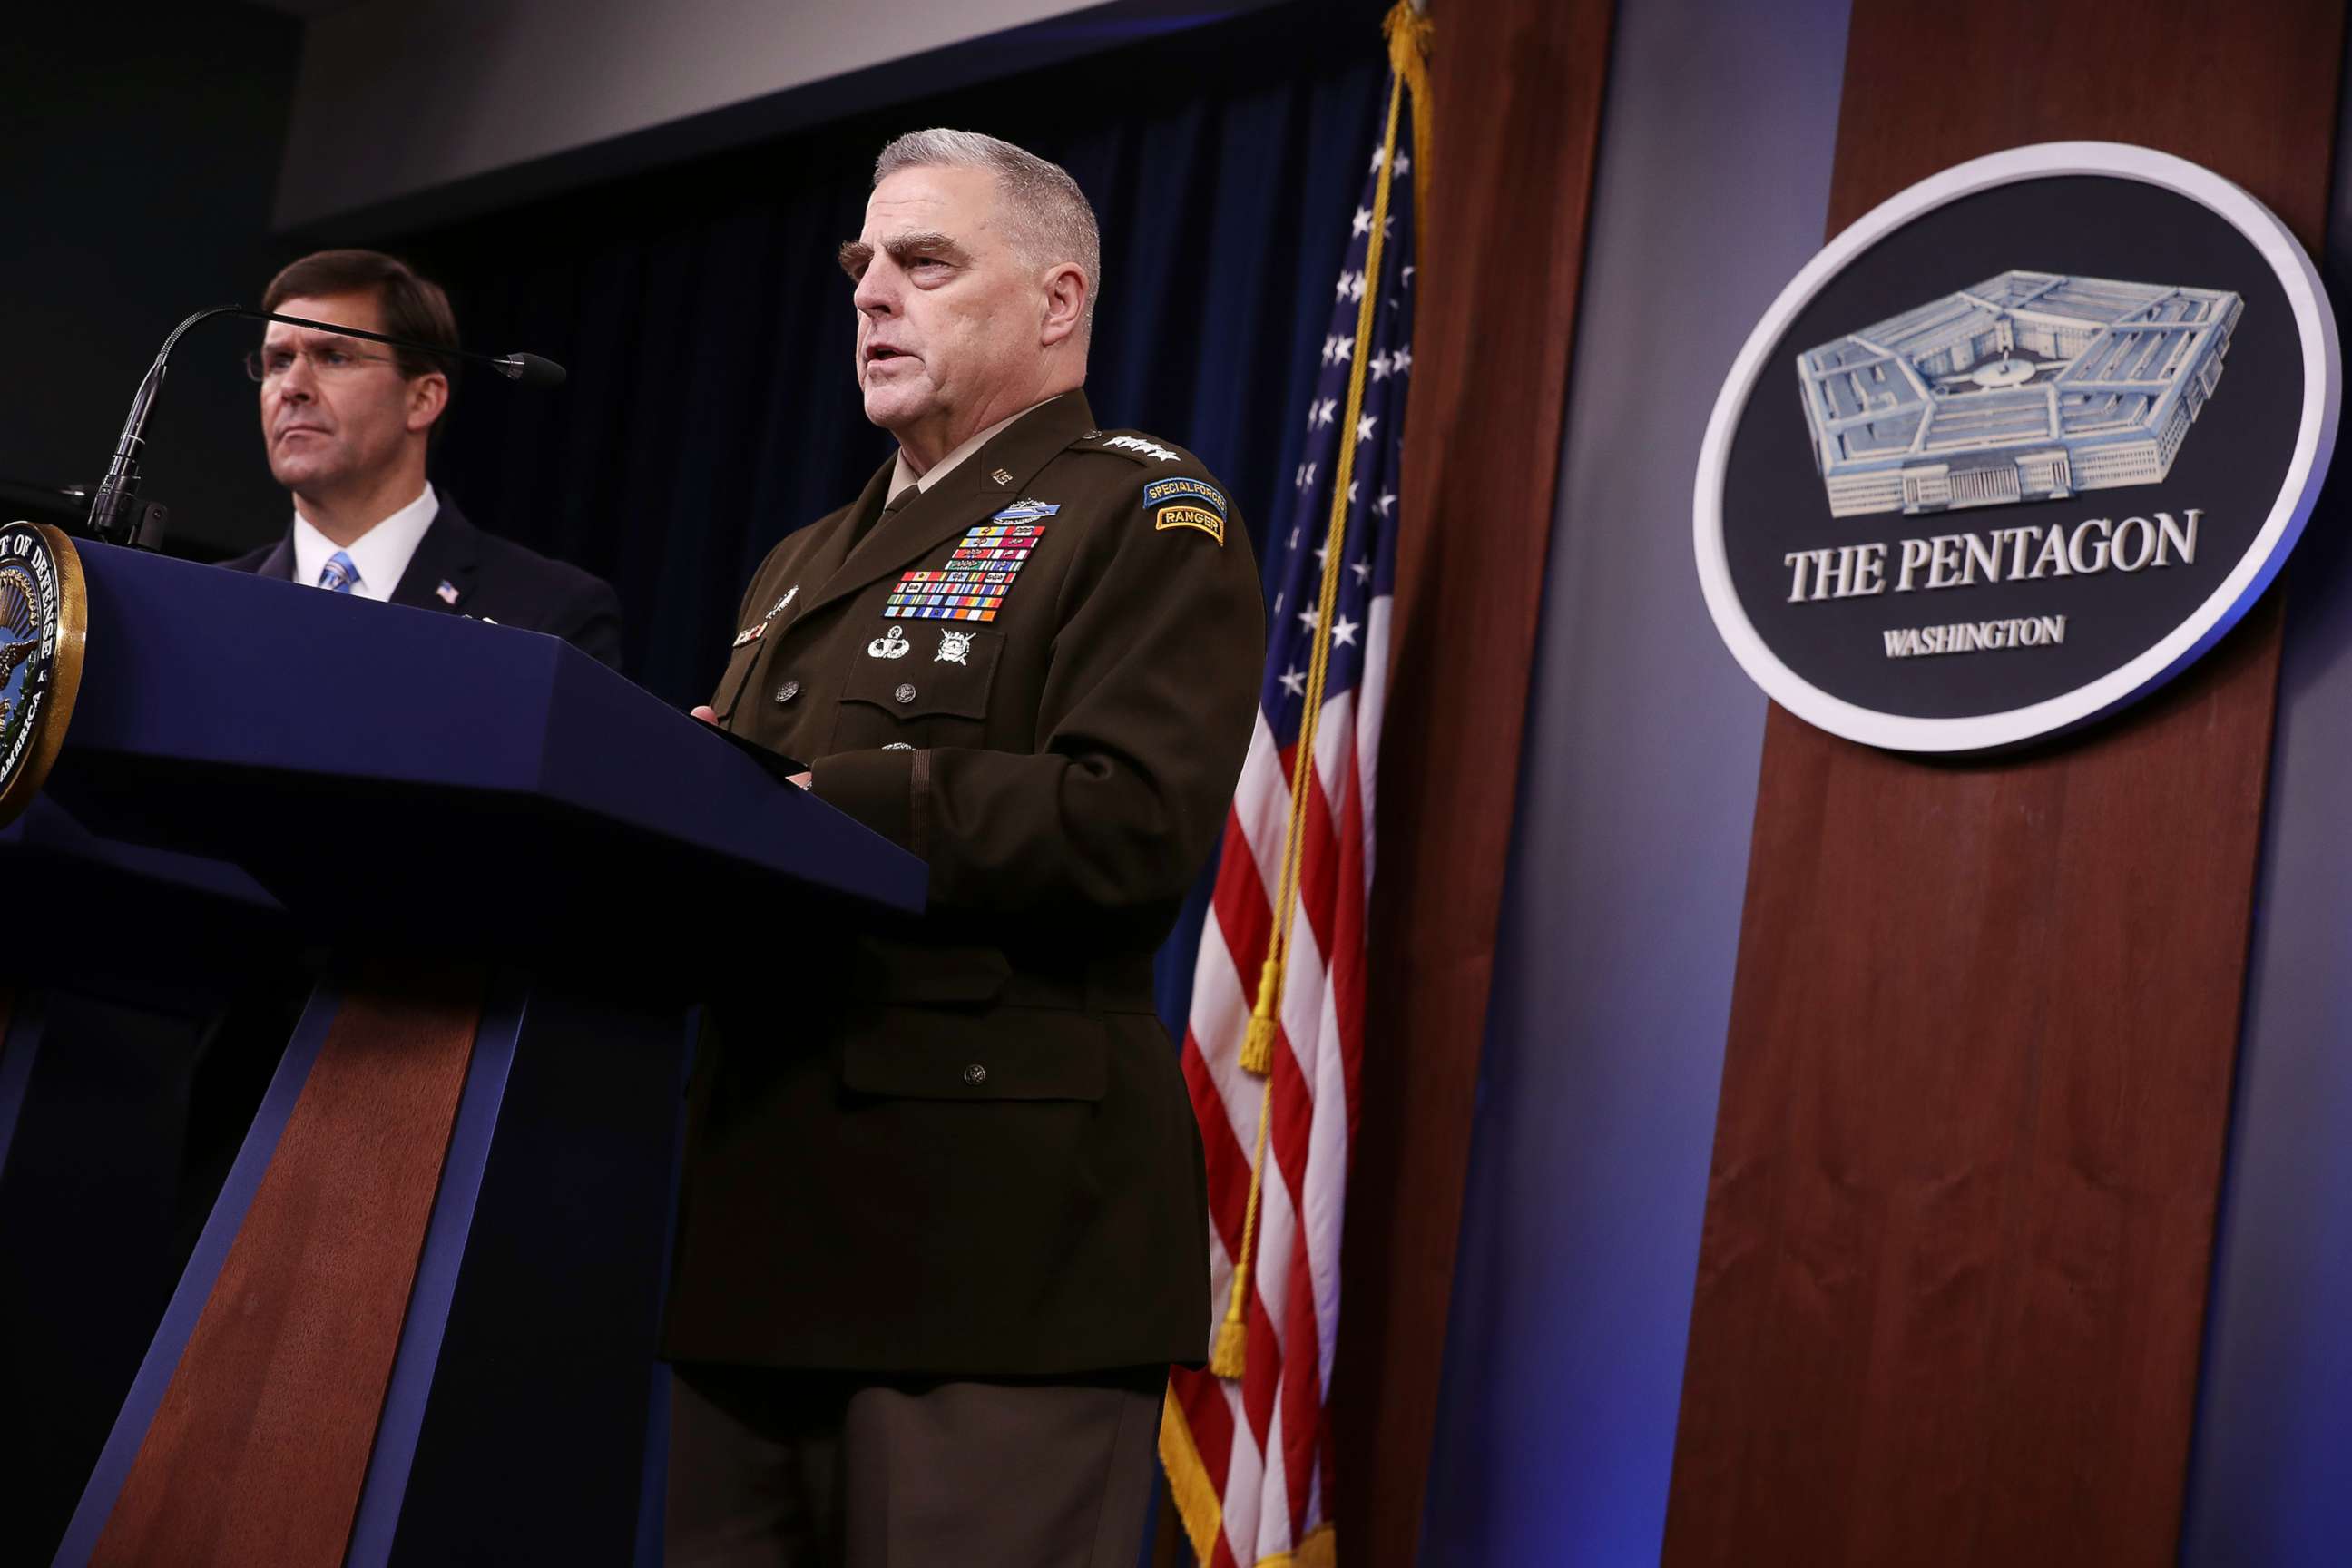 PHOTO: Defense Secretary Mark Esper (L) and Chairman of the Joint Chiefs of Staff Gen. Mark Milley hold a news conference at the Pentagon on Oct. 28, 2019, the day after it was announced that Abu Bakr al-Baghdadi was killed in a U.S. raid in Syria.